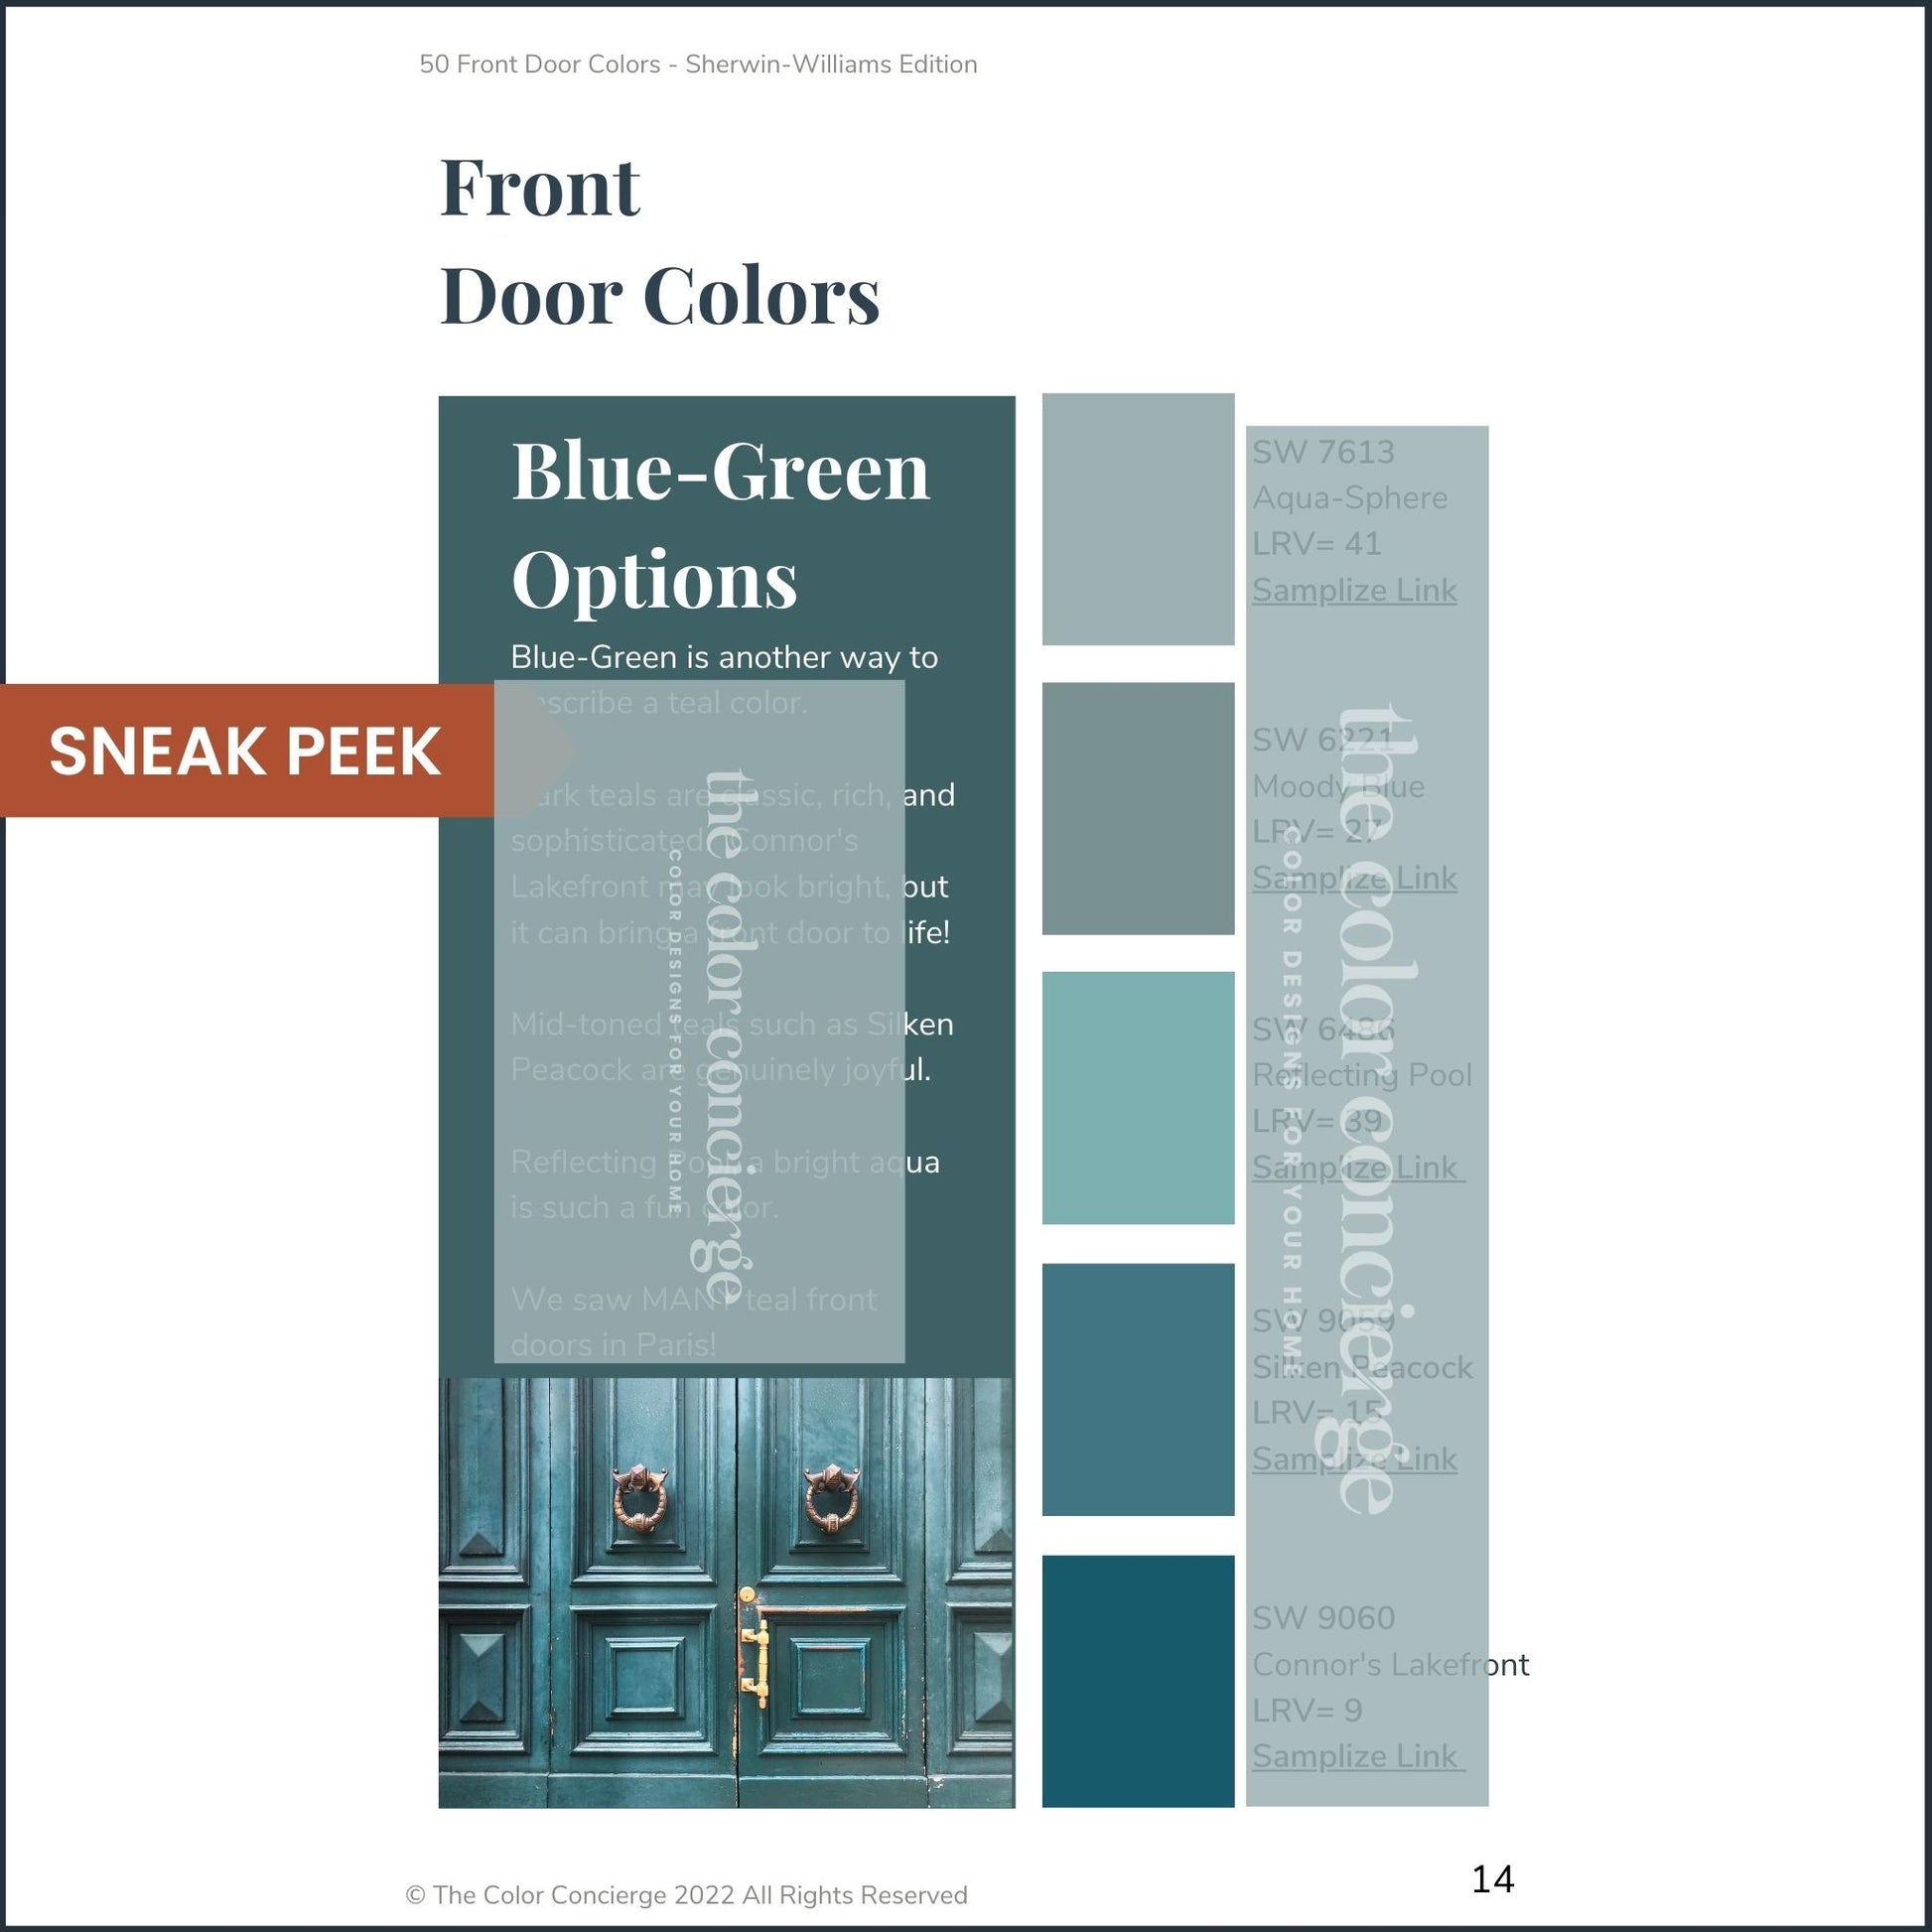 A sneak peek of blue-green front door paint colors from Sherwin-Williams